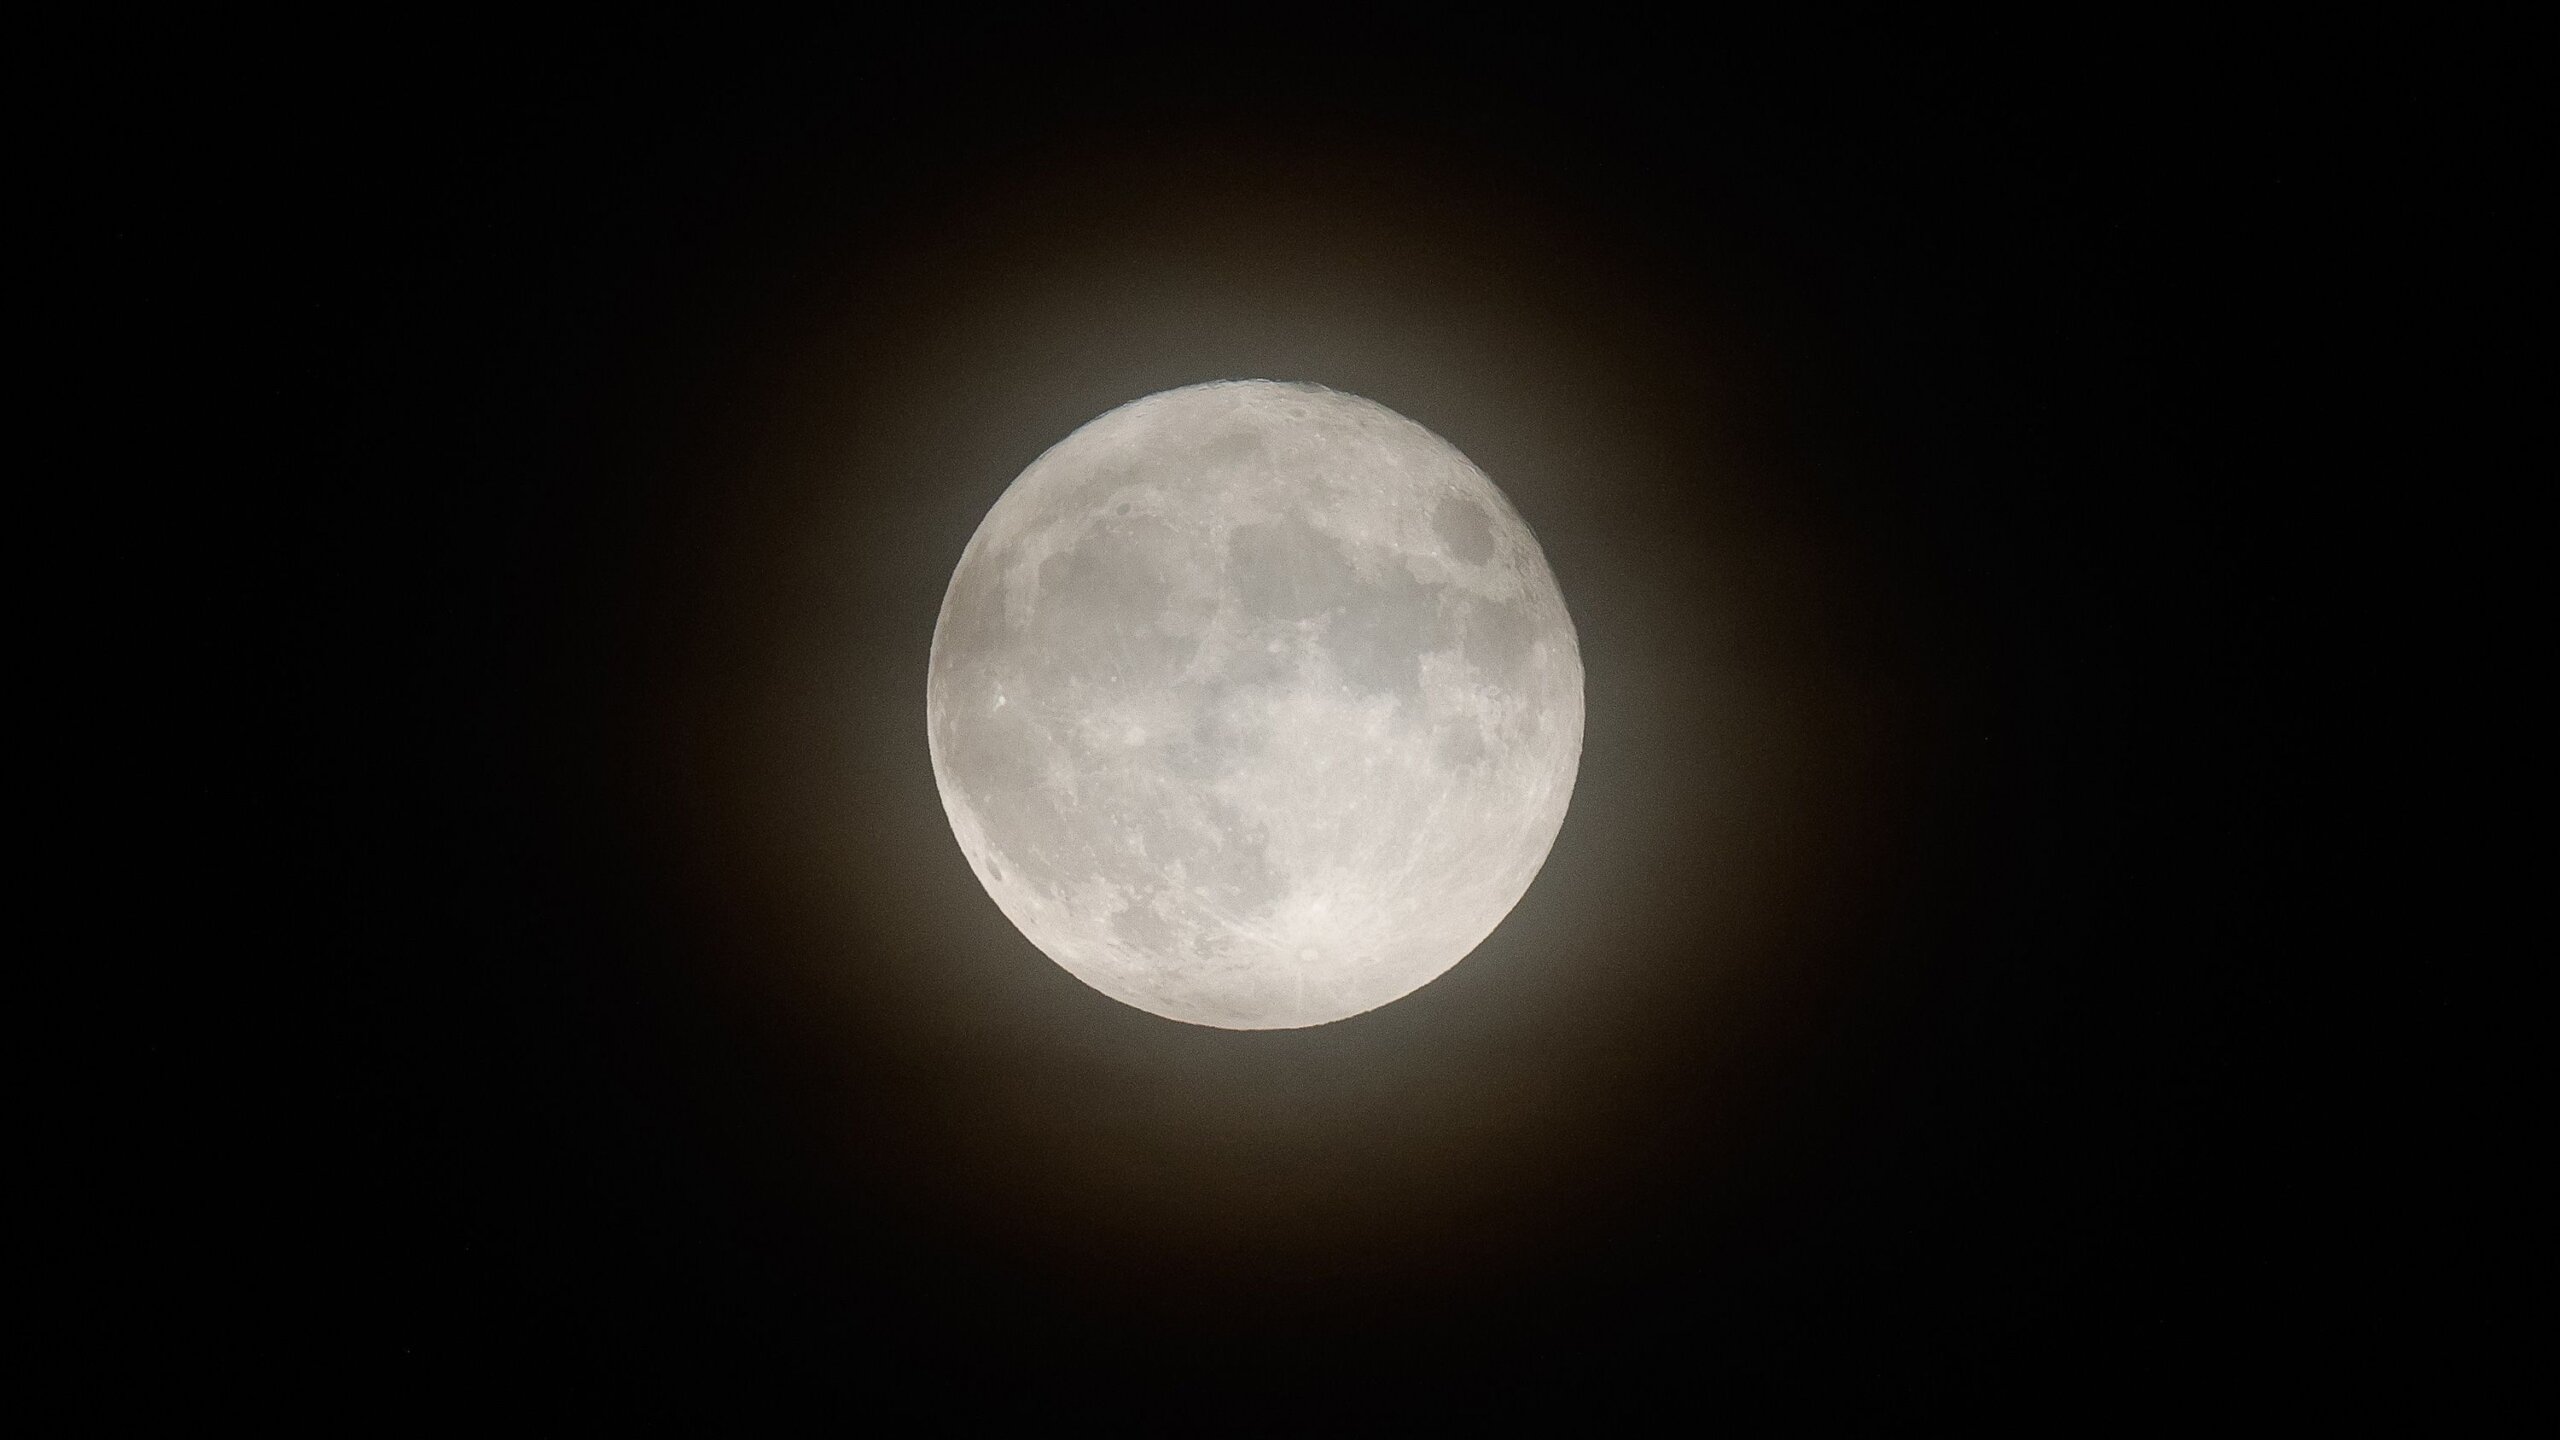 July’s supermoon will be 14,000 miles closer to Earth than a typical